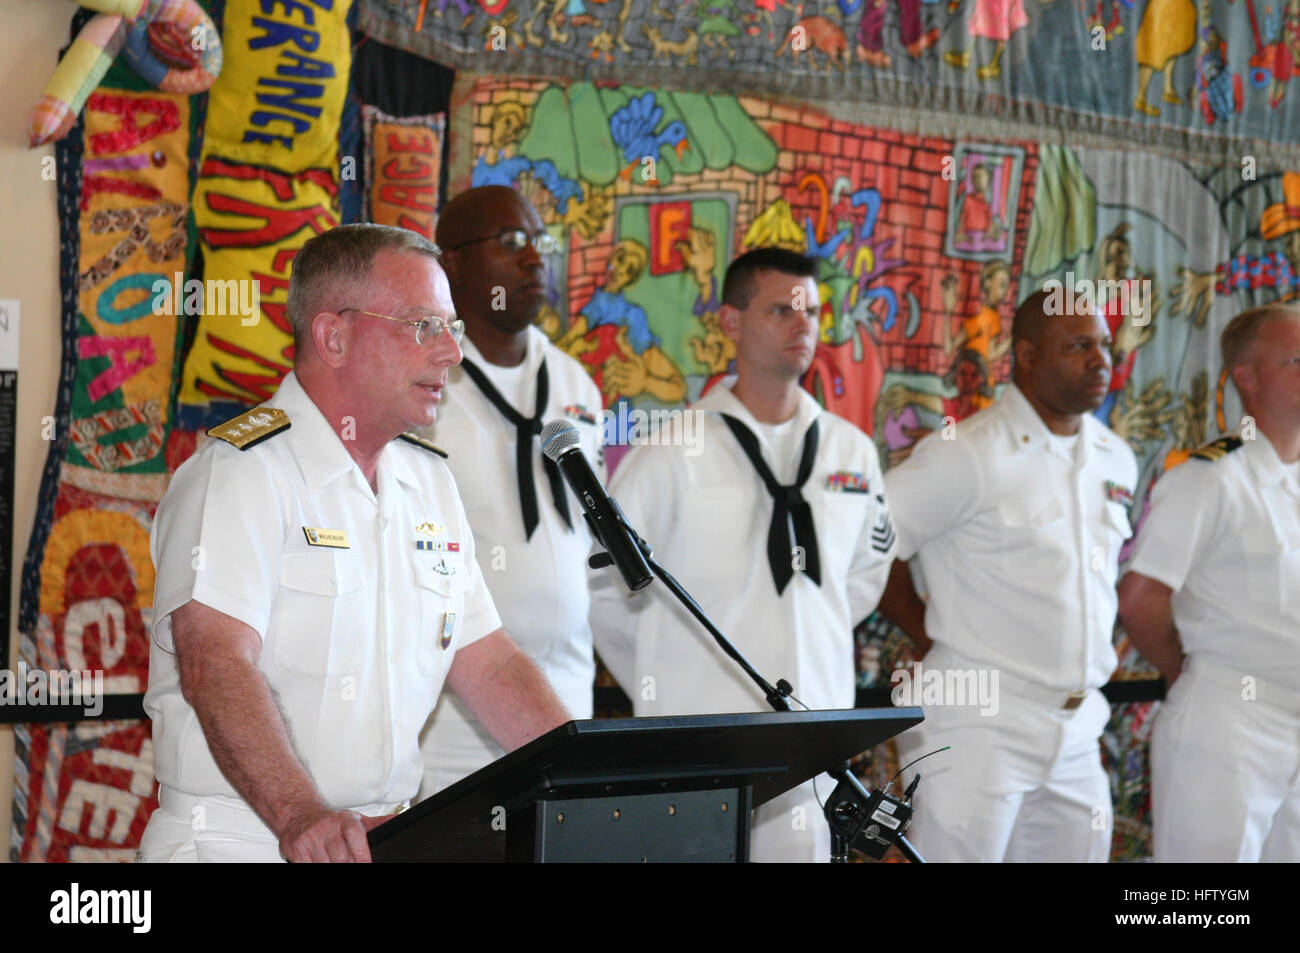 070901-N-7163S-001 CINCINNATI (September 1, 2007) – U.S. Joint Forces Command Chief of Staff Rear Adm. Ben Wachendorf addresses a tour group at the National Underground Railroad Freedom Center moments before the re-enlistment ceremony of local Sailor Yeoman 1st Class Robin Titus. Wachendorf, a Cincinnati native, was in town as the senior officer presiding over Navy Week in the Greater Cincinnati area. Navy Weeks are designed to show Americans the investment they have made in their Navy and to increase awareness in cities that do not have a significant Fleet presence. U.S. Navy Photo by Mass Co Stock Photo